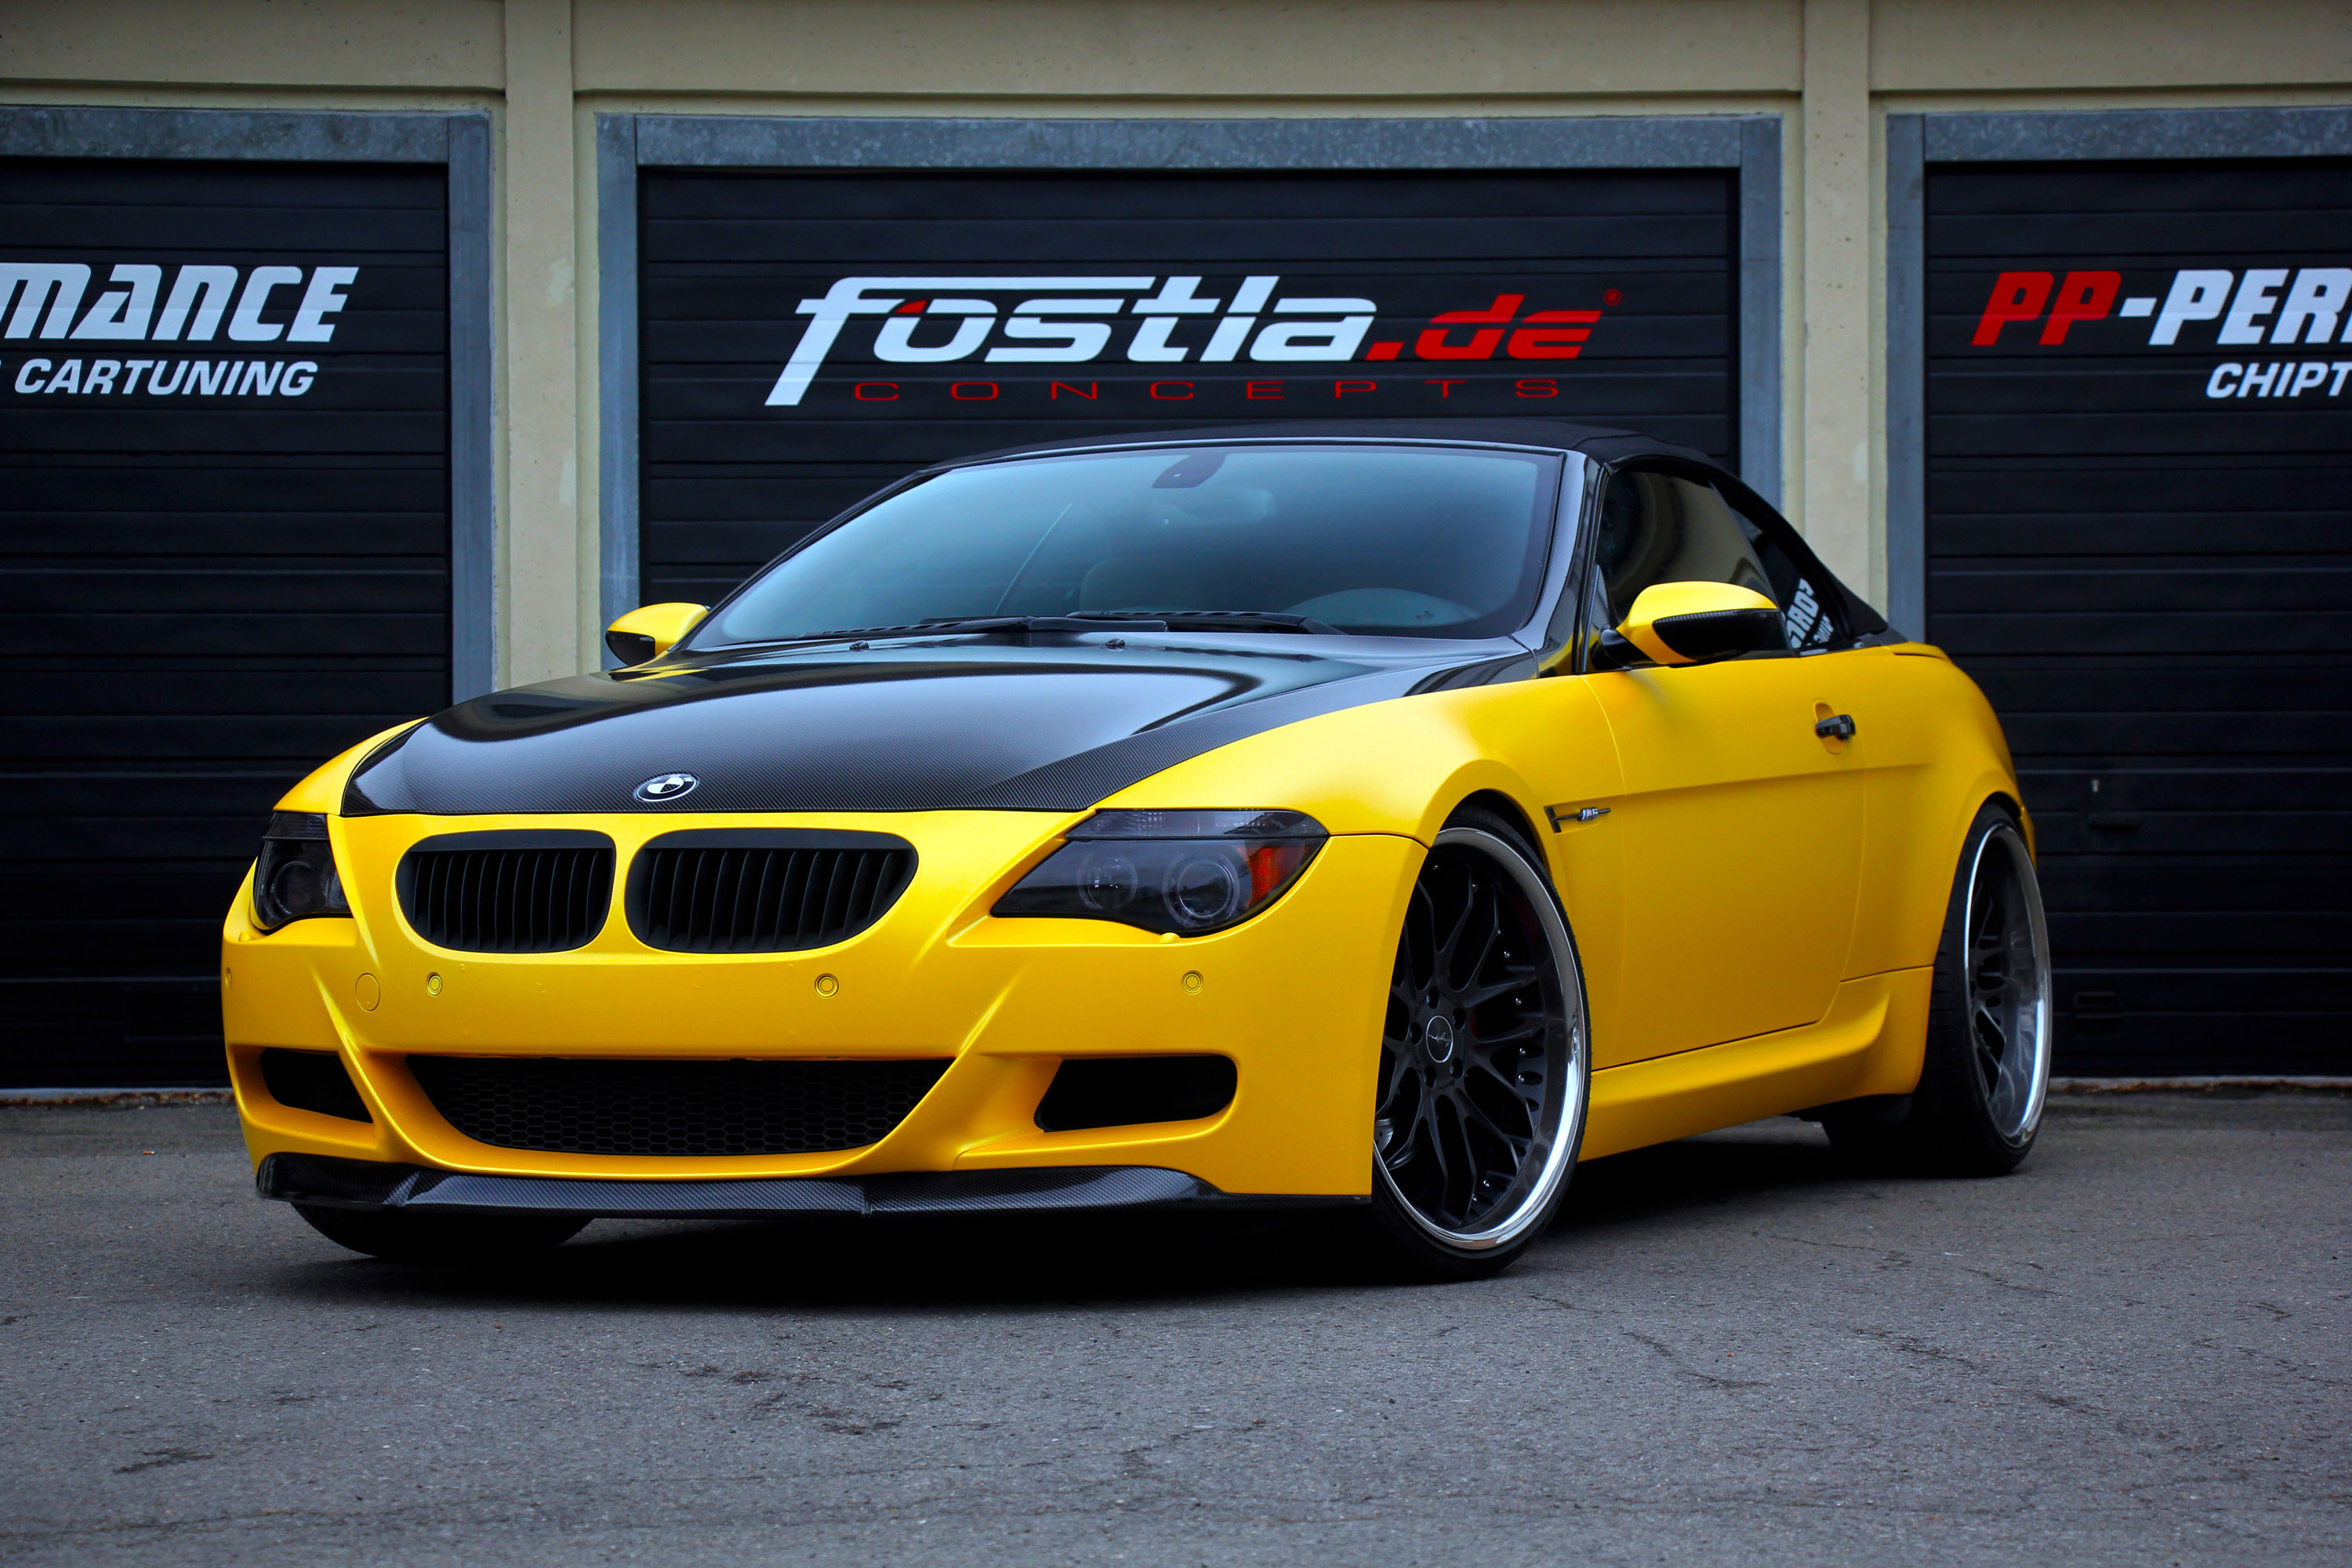 bmw, convertible, fostla, m6 collection of HD images